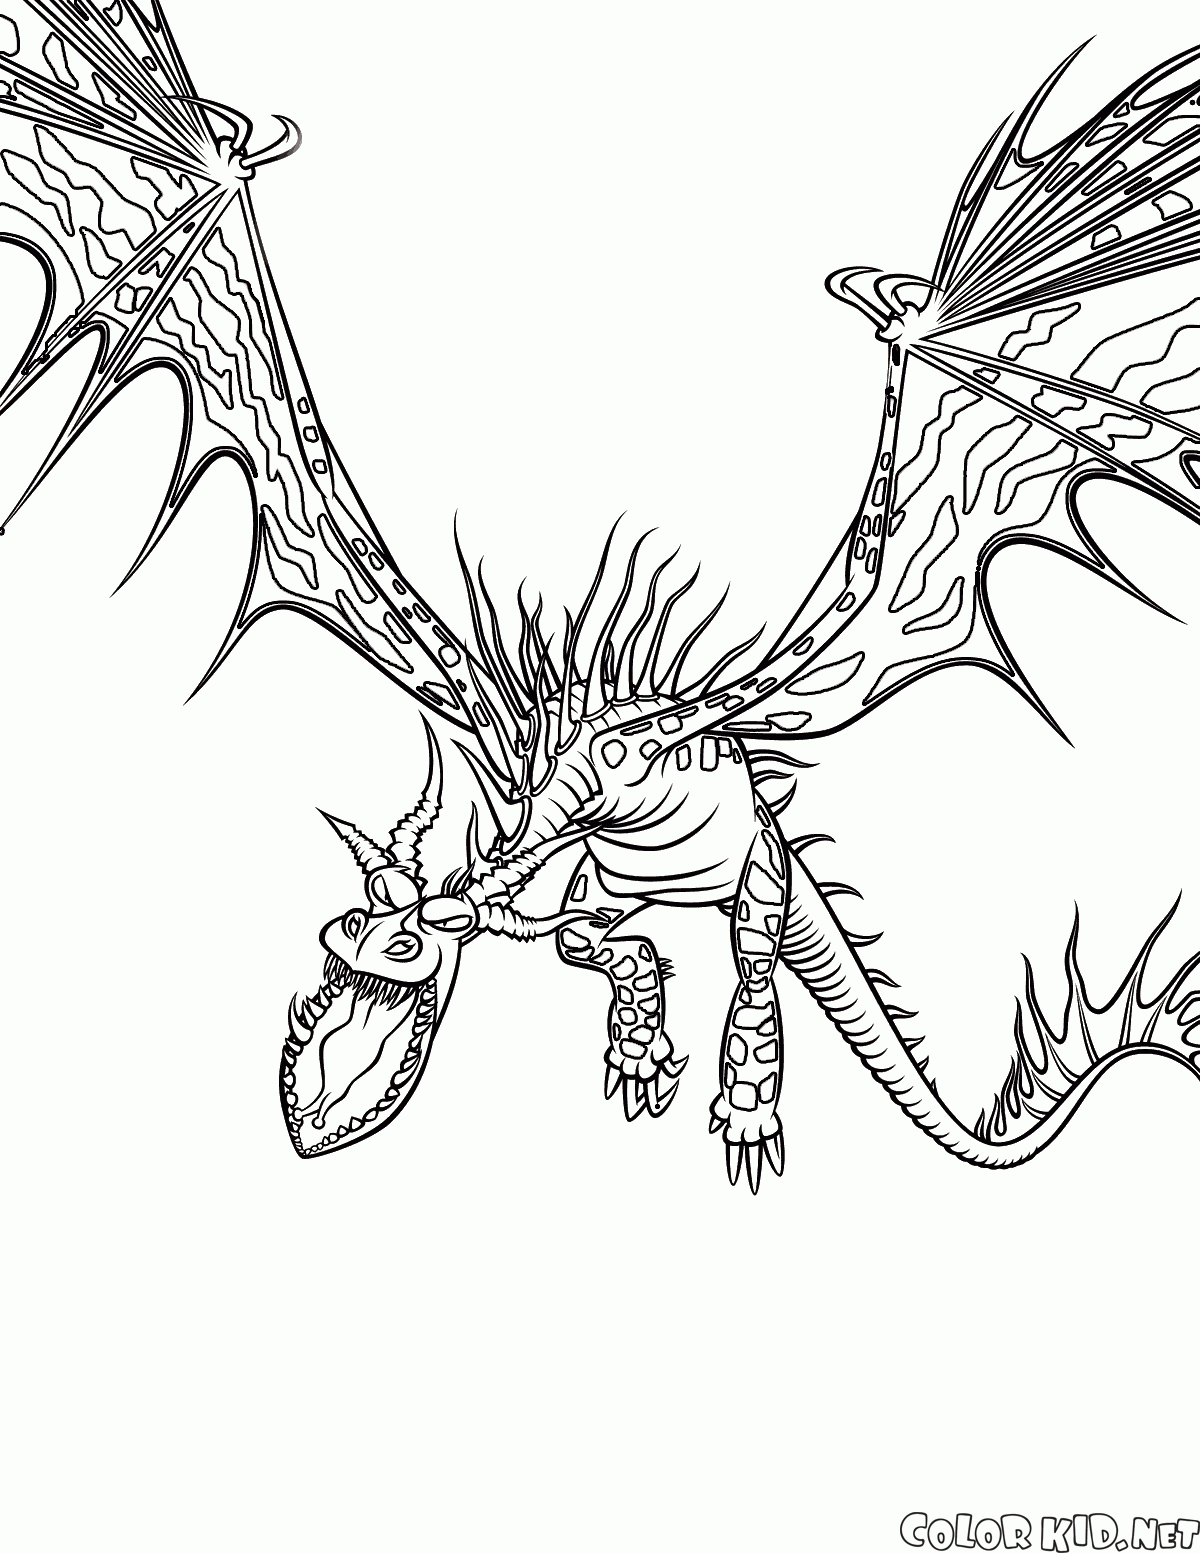 Coloring page - How to Train Your Dragon